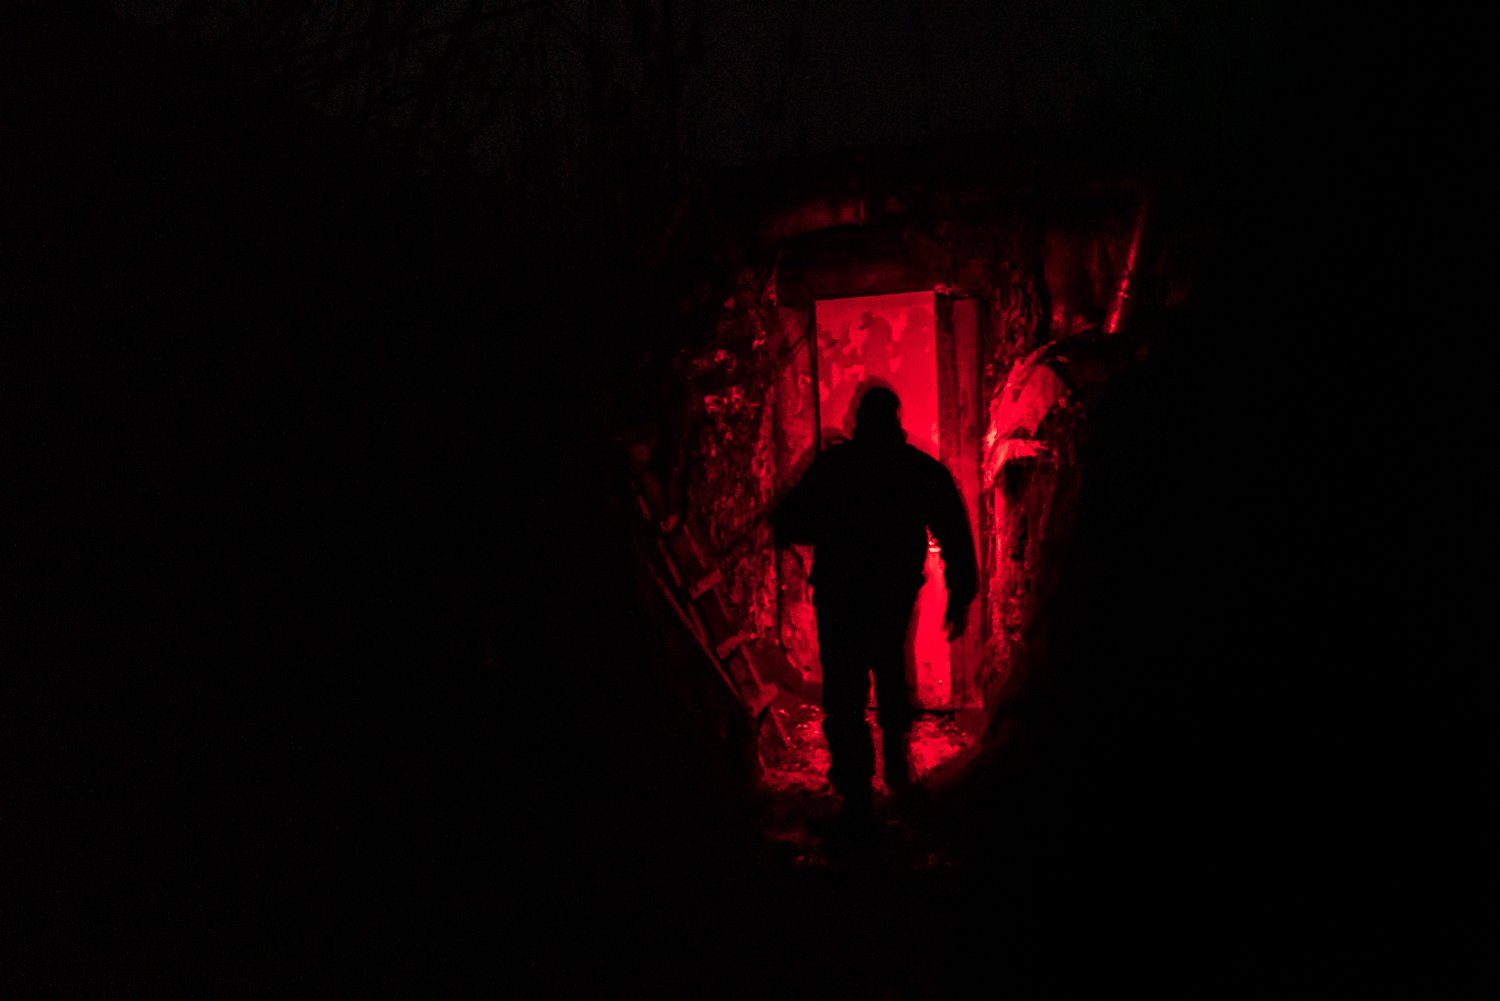  Taras, a Ukrainain Marine from the 503rd Marine Battalion, uses a red light to illuminate his way during a night watch at a front-line position on Monday, February 7, 2022 in Verkhnotoretske, Ukraine. 